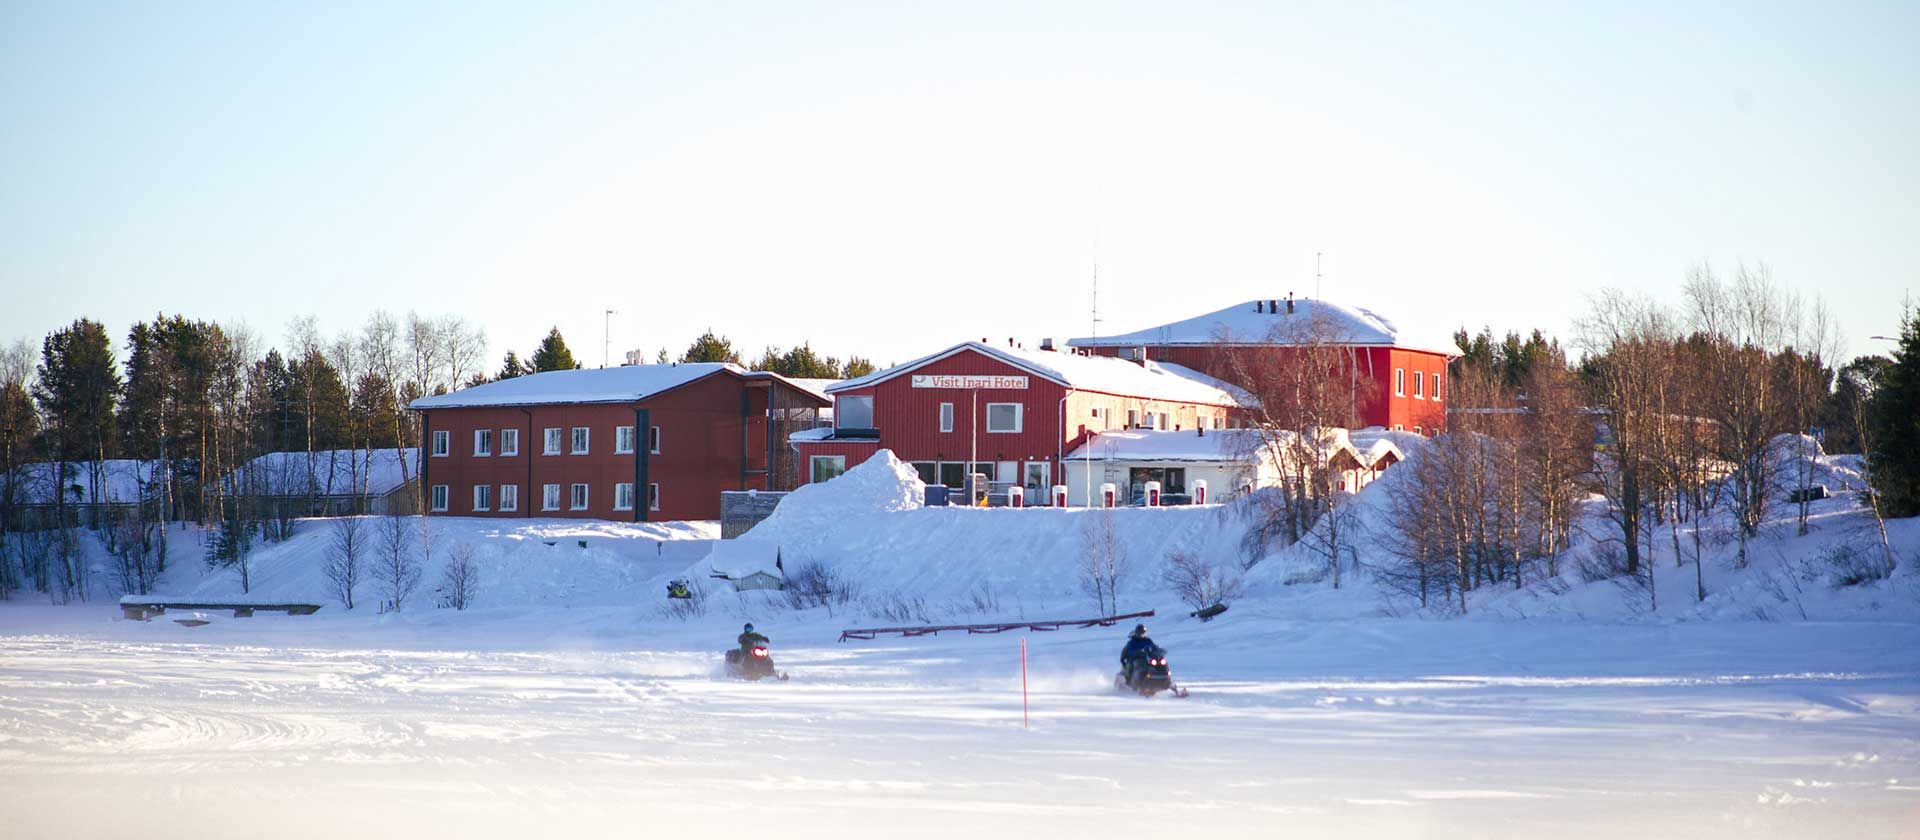 Captivating view of Hotel Inari, your ideal winter wonderland dream holiday destination in northern Lapland, Finland. Comfortable and cozy hotel accommodation.